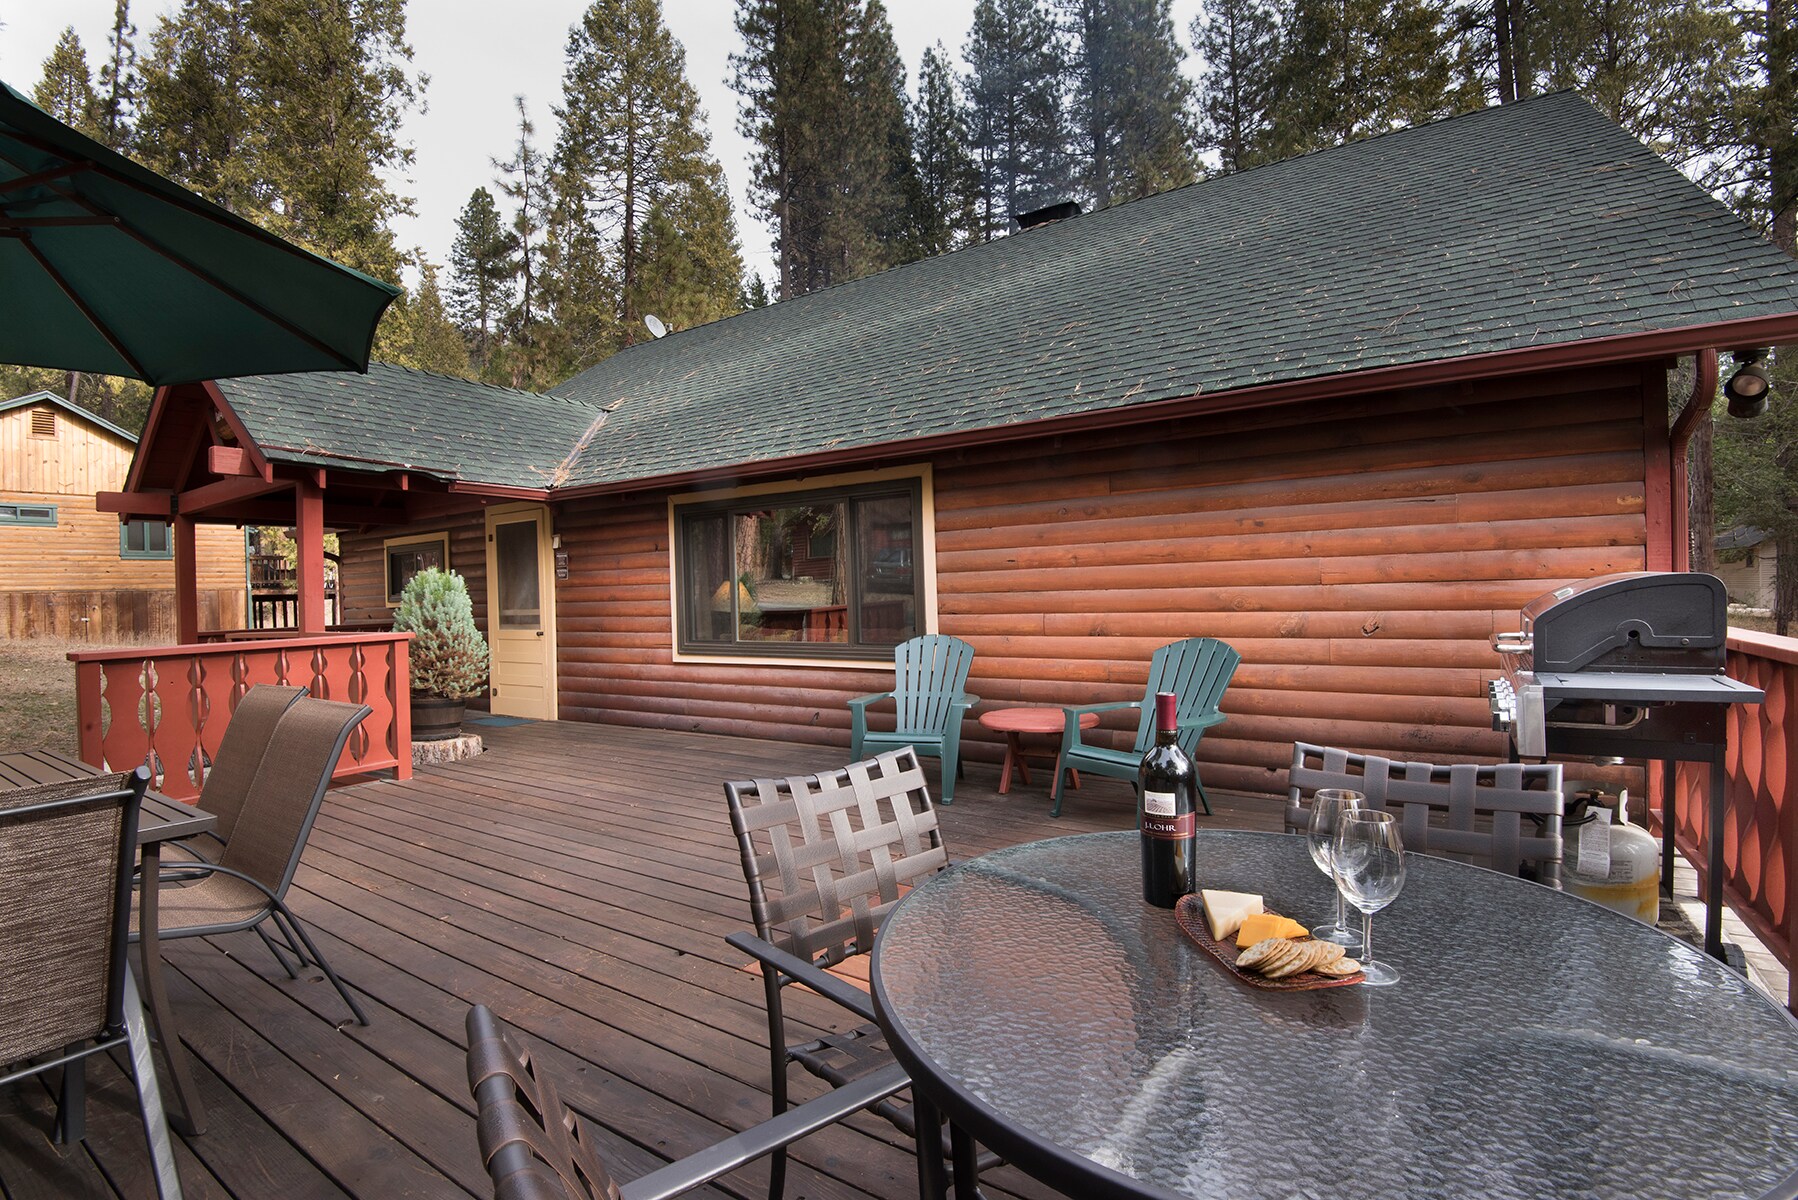 Front large deck with a Gas BBQ for grilling your favorite meals. Lots of room for family and friends to gather together and listen to the sounds of the Merced River.